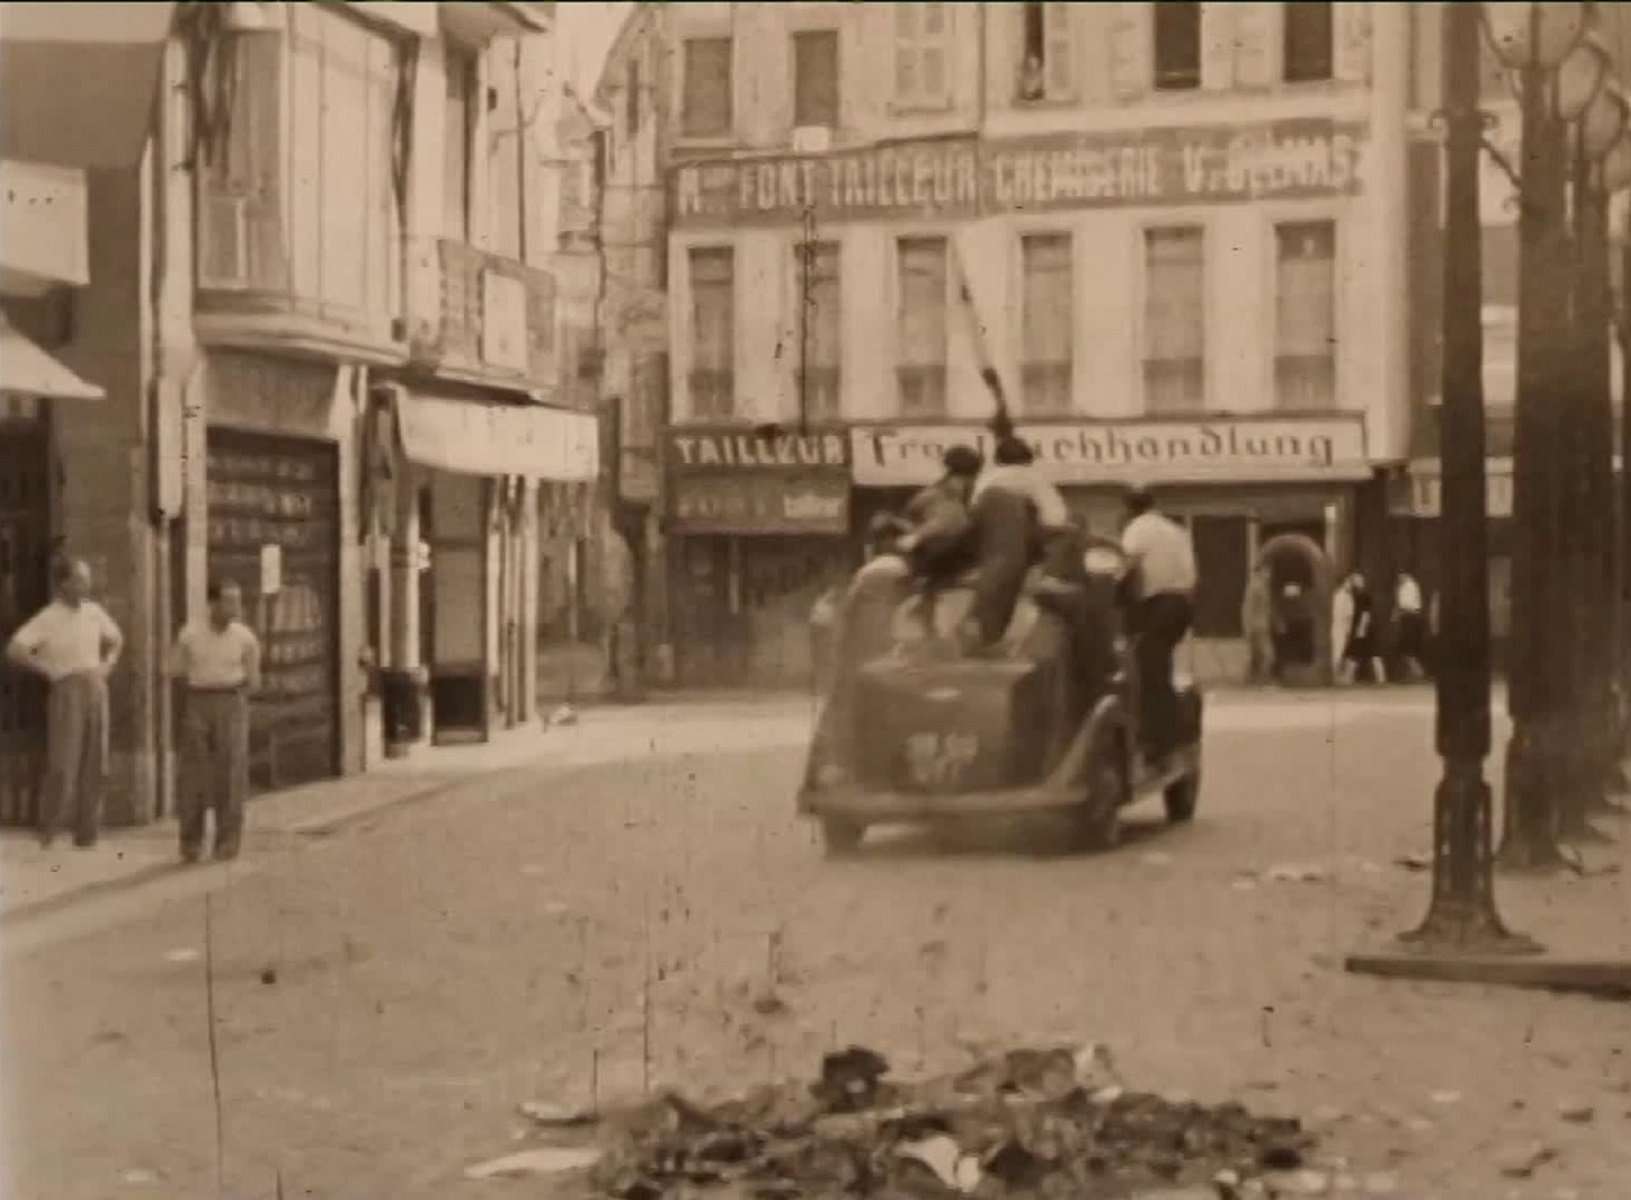 France 3 TV shows unique footage of Perpignan's liberation from Nazi occupation